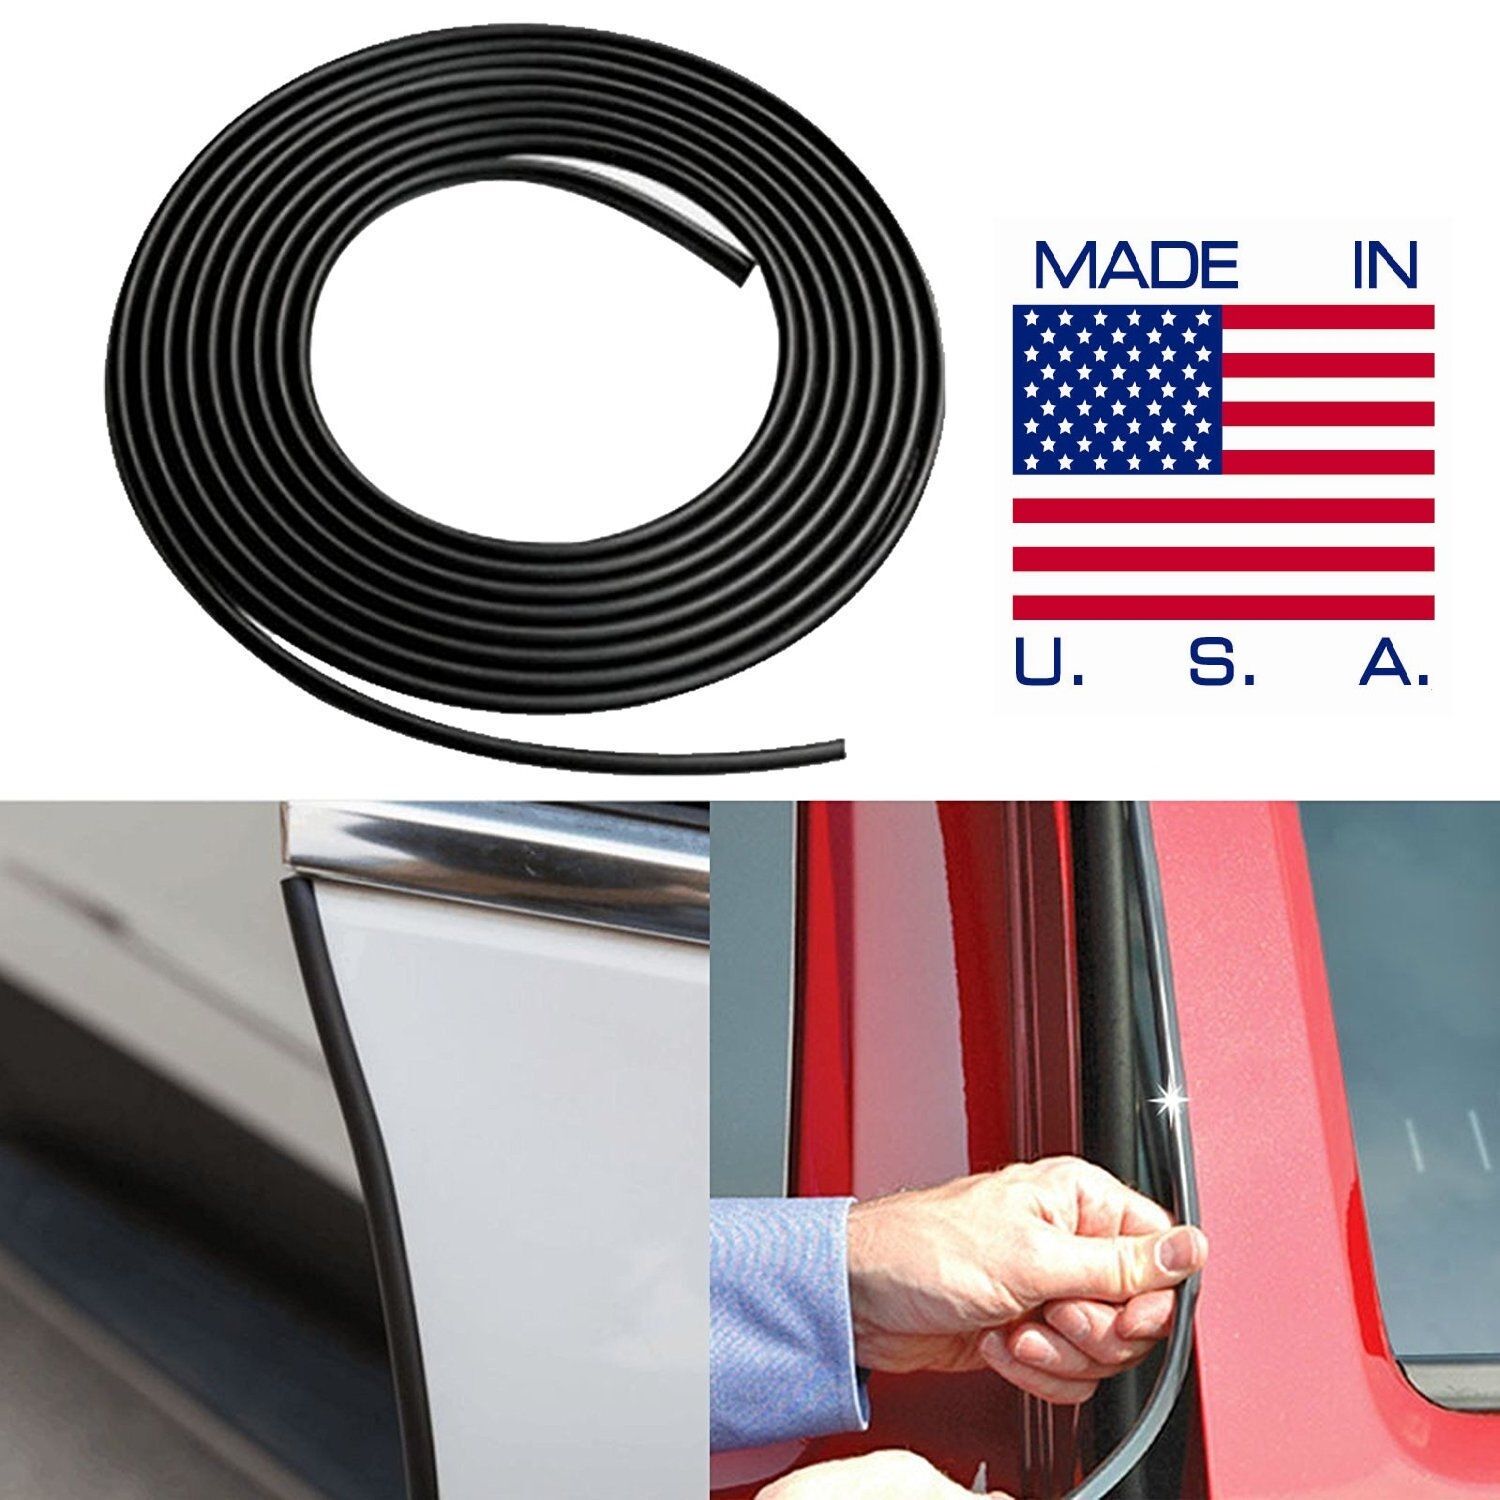 BLACK Door Edge Guard Trim Molding Car SUV Truck - Made in the USA FAST SHIPPING